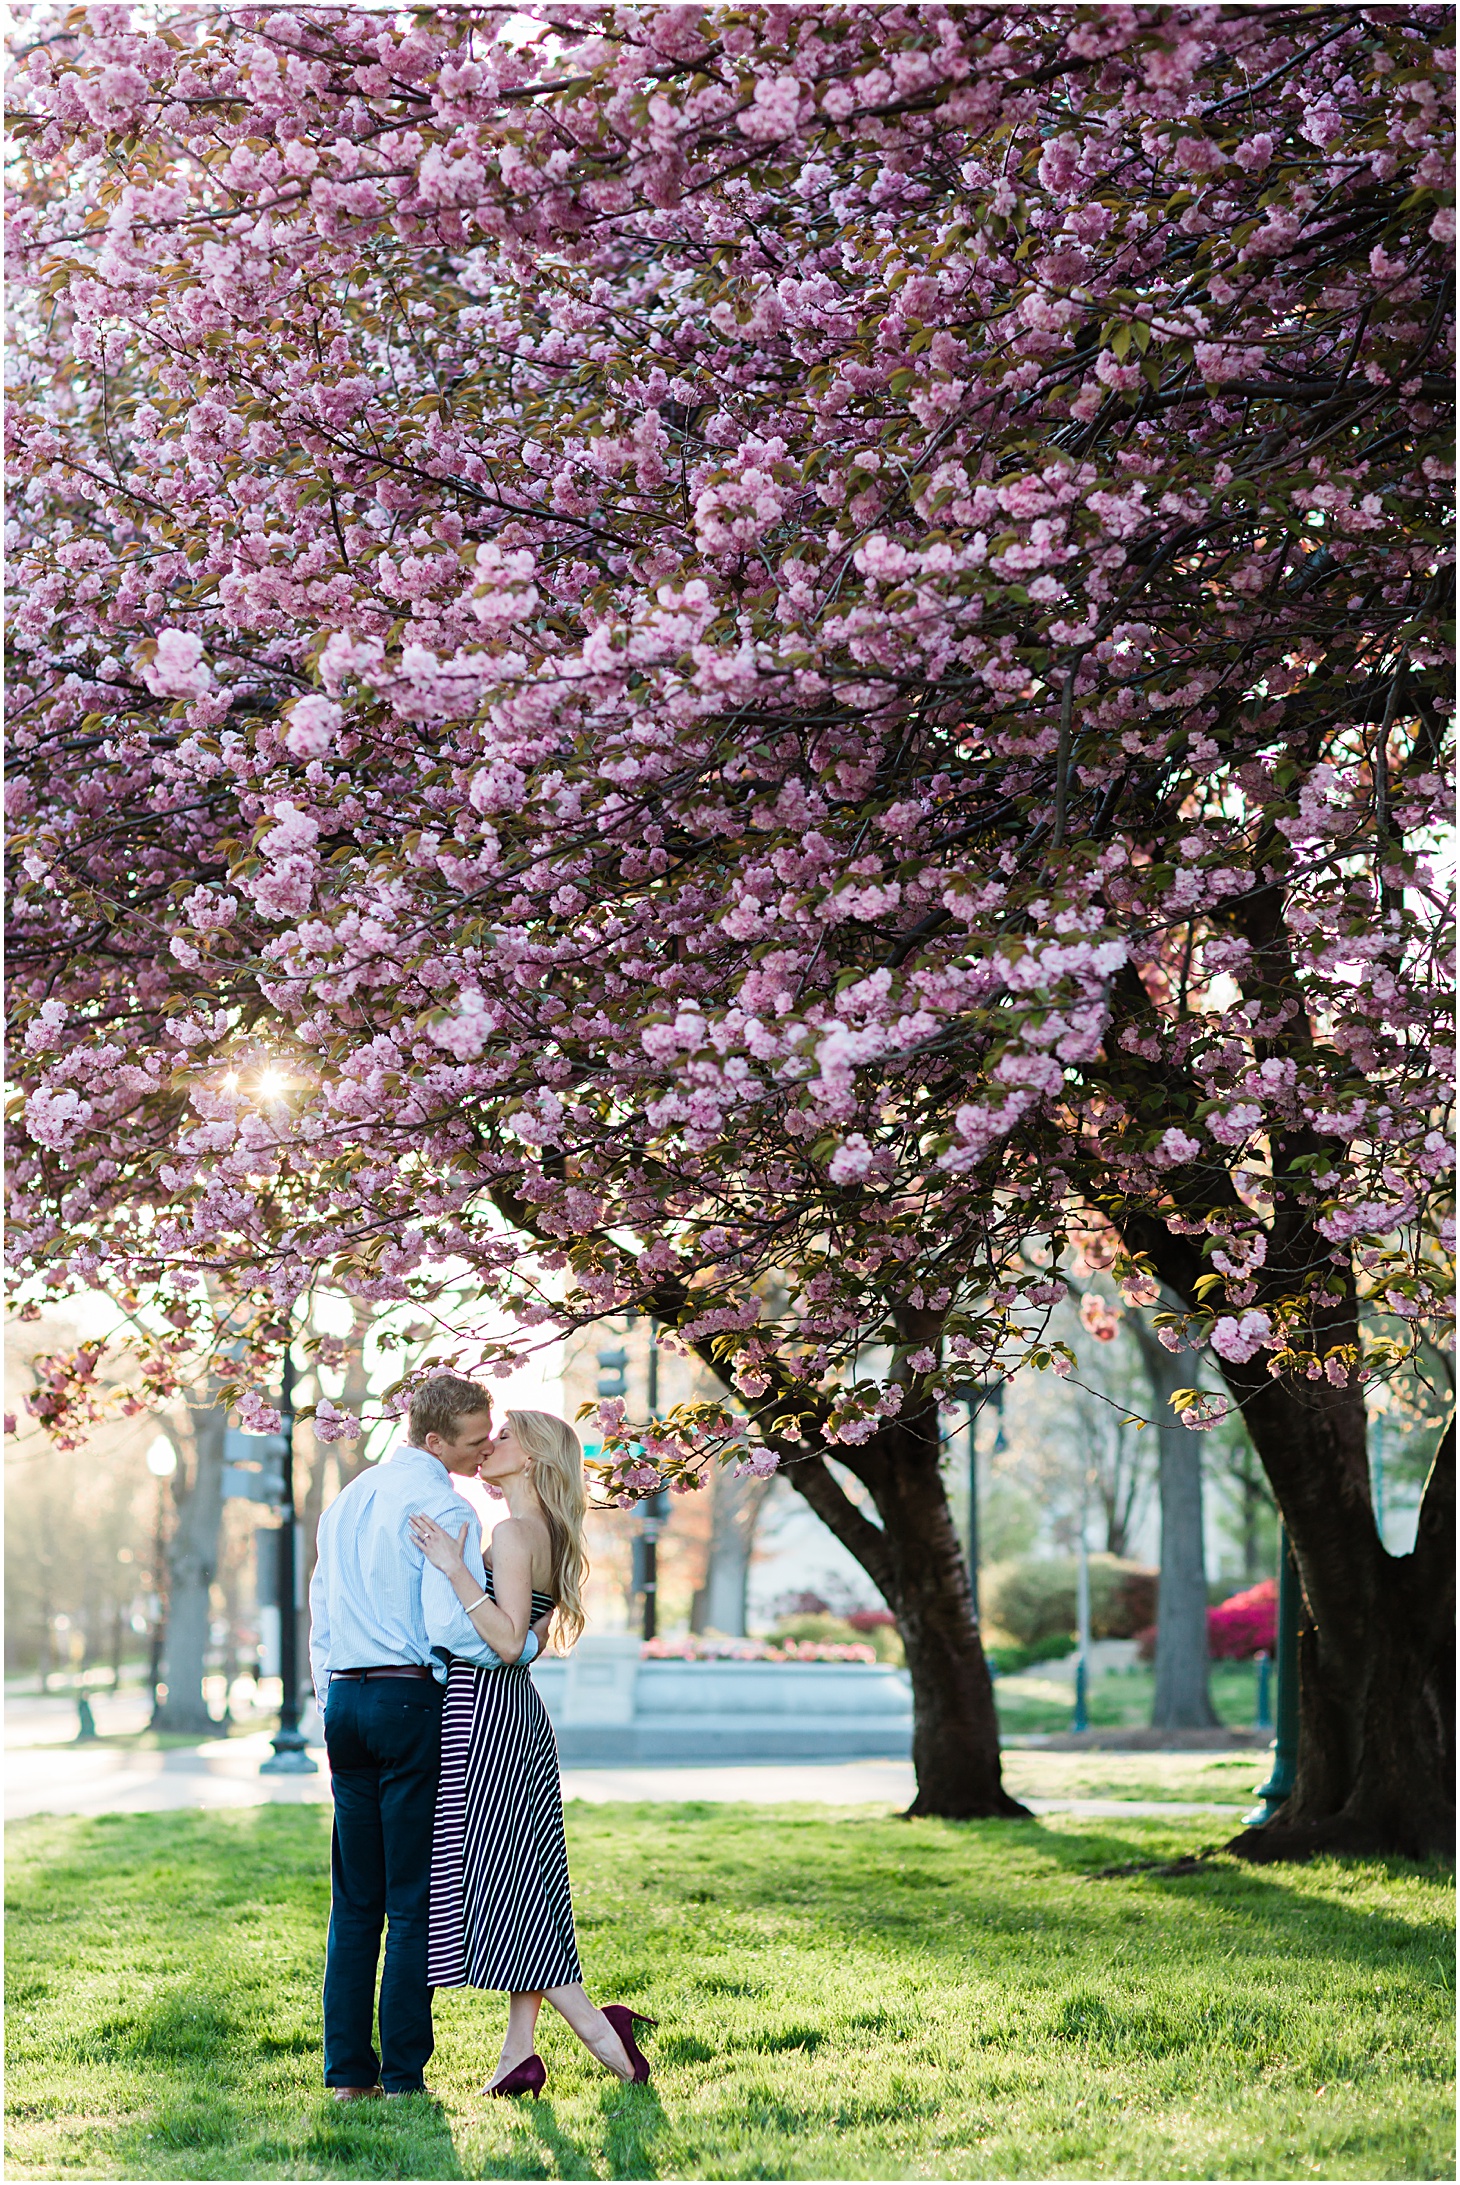 2017 Best of Engagements by Sarah Bradshaw | DC Engagement Cherry Blossoms